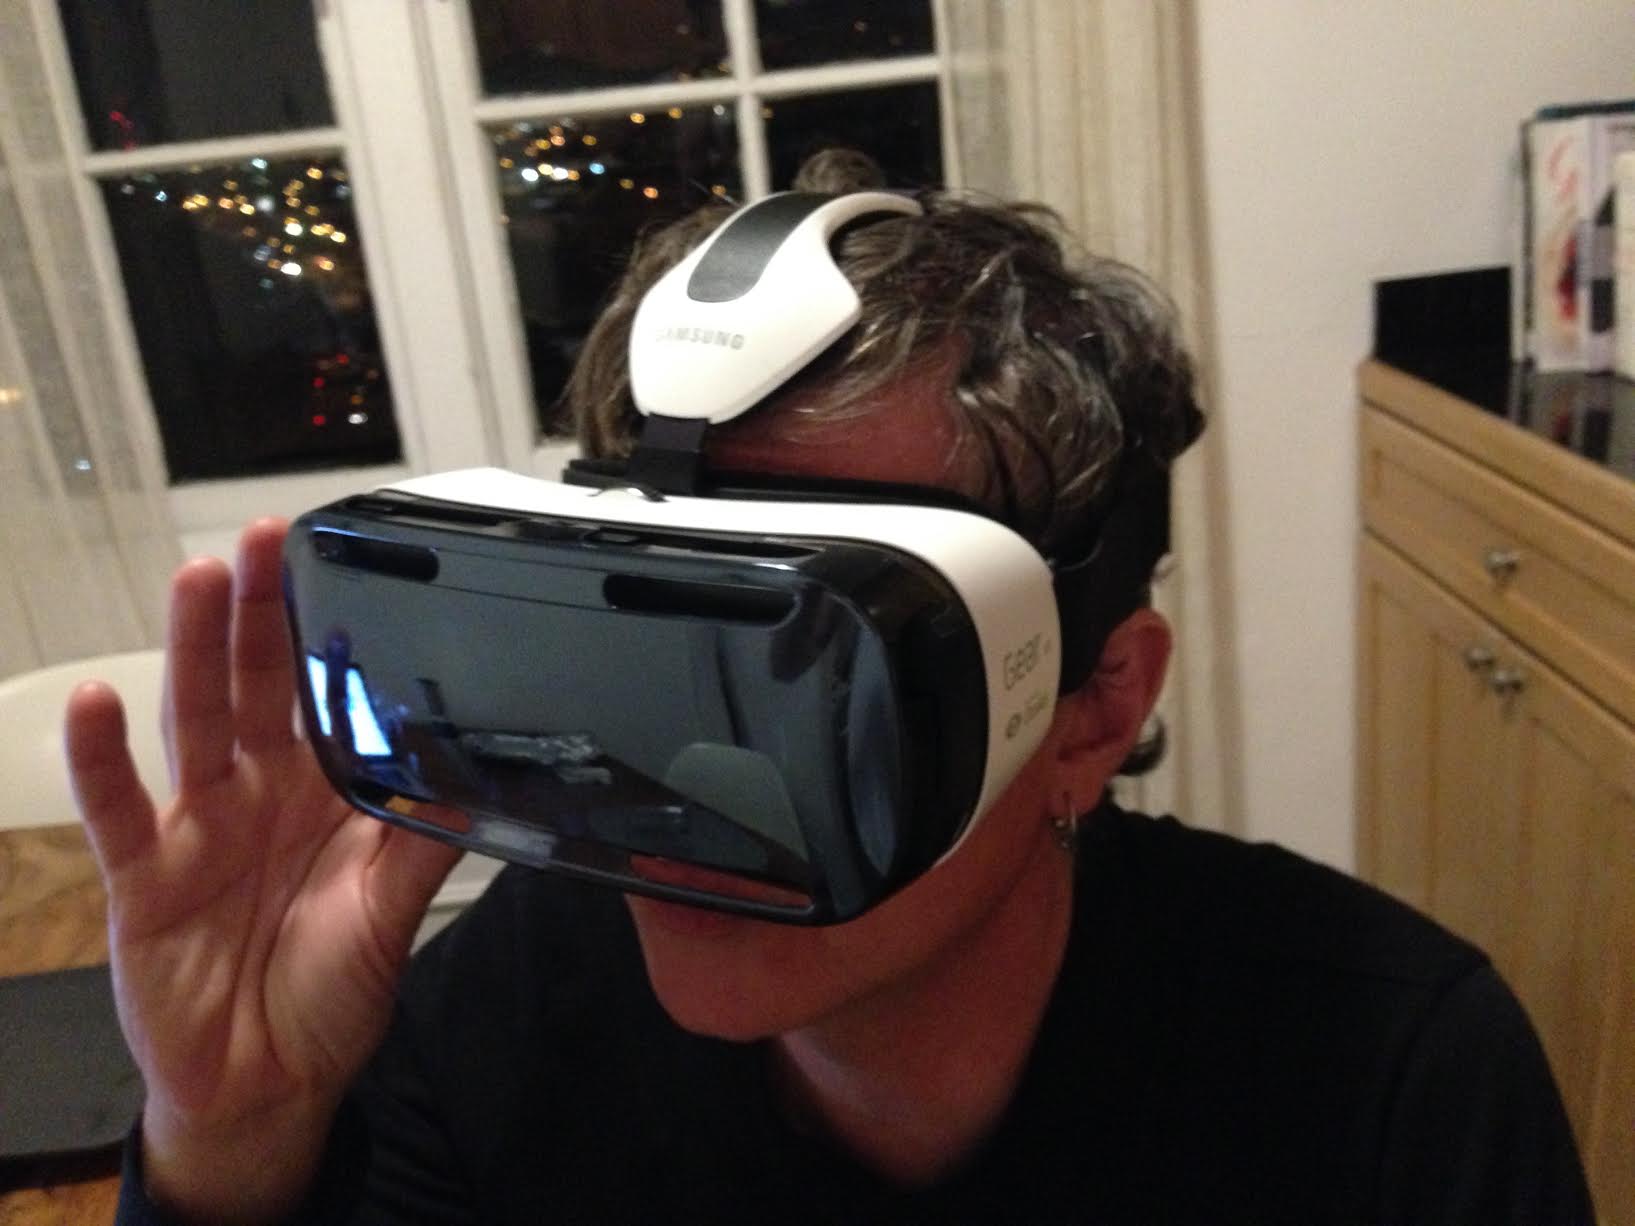 Tony Parisi wearing a Gear VR - source